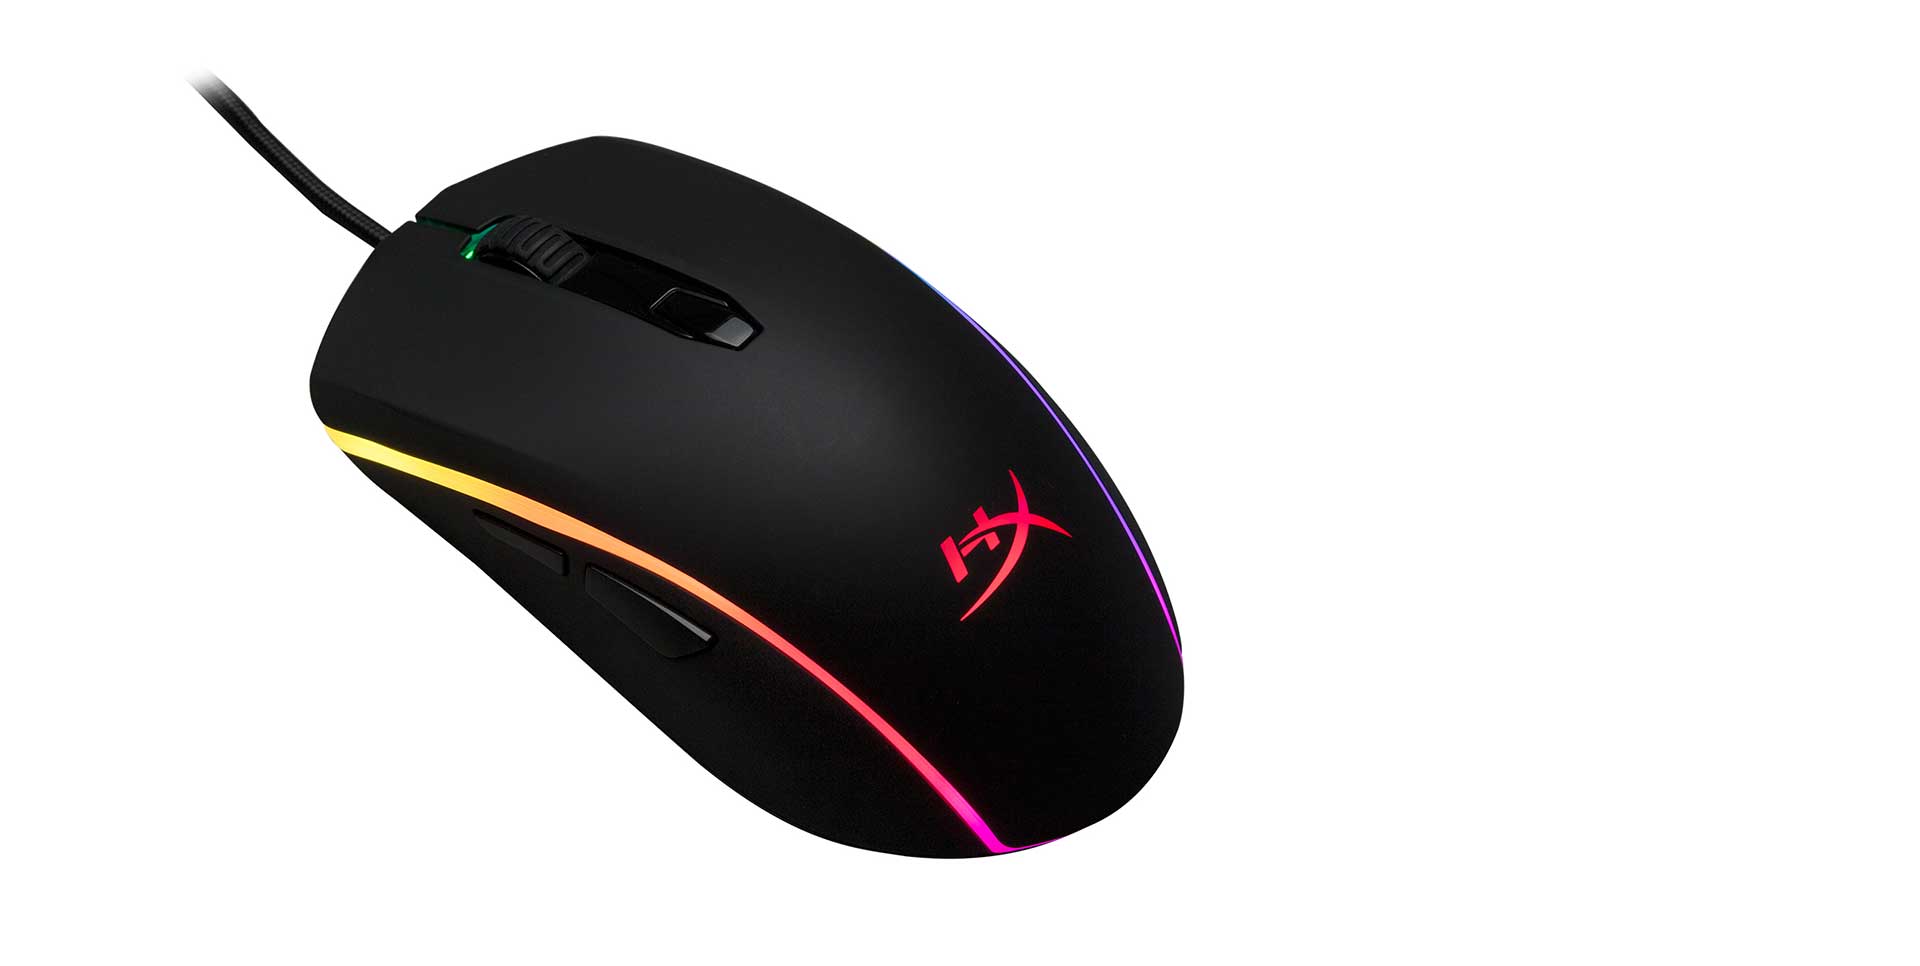 Hyperx Pulsefire Surge Fortnite Review Hyperx Pulsefire Surge A Gaming Mouse That Fits Your Needs